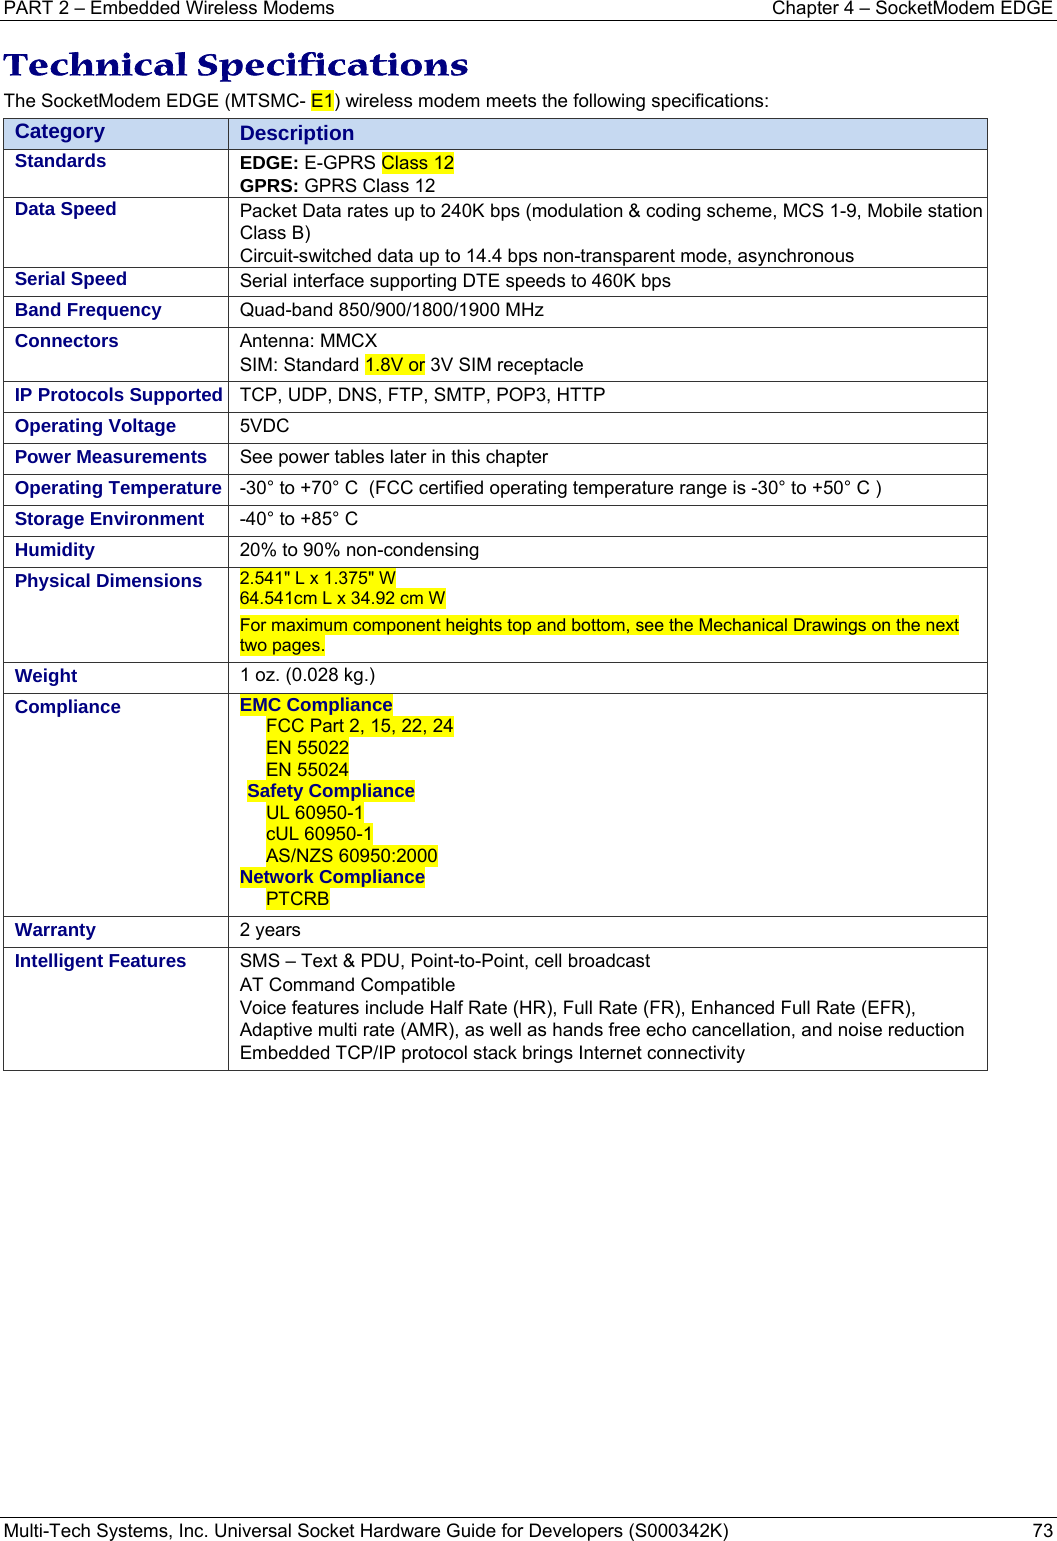 PART 2 – Embedded Wireless Modems  Chapter 4 – SocketModem EDGE Multi-Tech Systems, Inc. Universal Socket Hardware Guide for Developers (S000342K)  73  Technical Specifications The SocketModem EDGE (MTSMC- E1) wireless modem meets the following specifications:  Category  Description  Standards  EDGE: E-GPRS Class 12 GPRS: GPRS Class 12 Data Speed  Packet Data rates up to 240K bps (modulation &amp; coding scheme, MCS 1-9, Mobile station Class B) Circuit-switched data up to 14.4 bps non-transparent mode, asynchronous Serial Speed  Serial interface supporting DTE speeds to 460K bps Band Frequency  Quad-band 850/900/1800/1900 MHz Connectors  Antenna: MMCX SIM: Standard 1.8V or 3V SIM receptacle IP Protocols Supported  TCP, UDP, DNS, FTP, SMTP, POP3, HTTP Operating Voltage  5VDC Power Measurements  See power tables later in this chapter  Operating Temperature  -30° to +70° C  (FCC certified operating temperature range is -30° to +50° C ) Storage Environment  -40° to +85° C  Humidity  20% to 90% non-condensing  Physical Dimensions  2.541&quot; L x 1.375&quot; W 64.541cm L x 34.92 cm W For maximum component heights top and bottom, see the Mechanical Drawings on the next two pages. Weight  1 oz. (0.028 kg.)  Compliance  EMC Compliance  FCC Part 2, 15, 22, 24 EN 55022 EN 55024 Safety Compliance UL 60950-1 cUL 60950-1 AS/NZS 60950:2000 Network Compliance  PTCRB Warranty  2 years Intelligent Features  SMS – Text &amp; PDU, Point-to-Point, cell broadcast AT Command Compatible Voice features include Half Rate (HR), Full Rate (FR), Enhanced Full Rate (EFR), Adaptive multi rate (AMR), as well as hands free echo cancellation, and noise reduction Embedded TCP/IP protocol stack brings Internet connectivity   